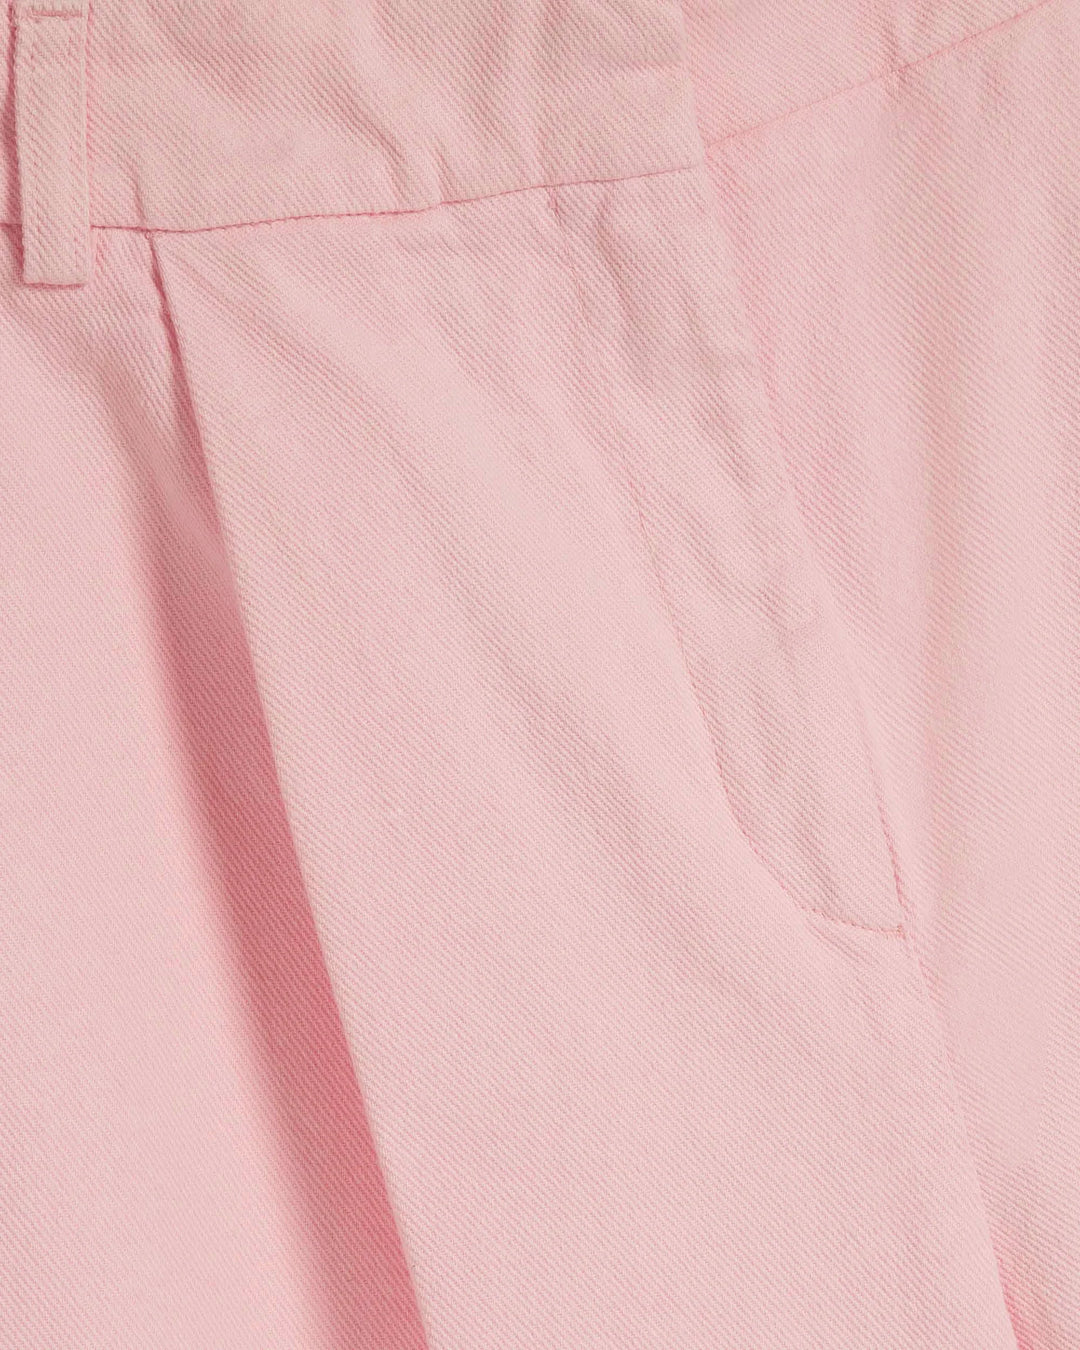 Market Trousers - Pink